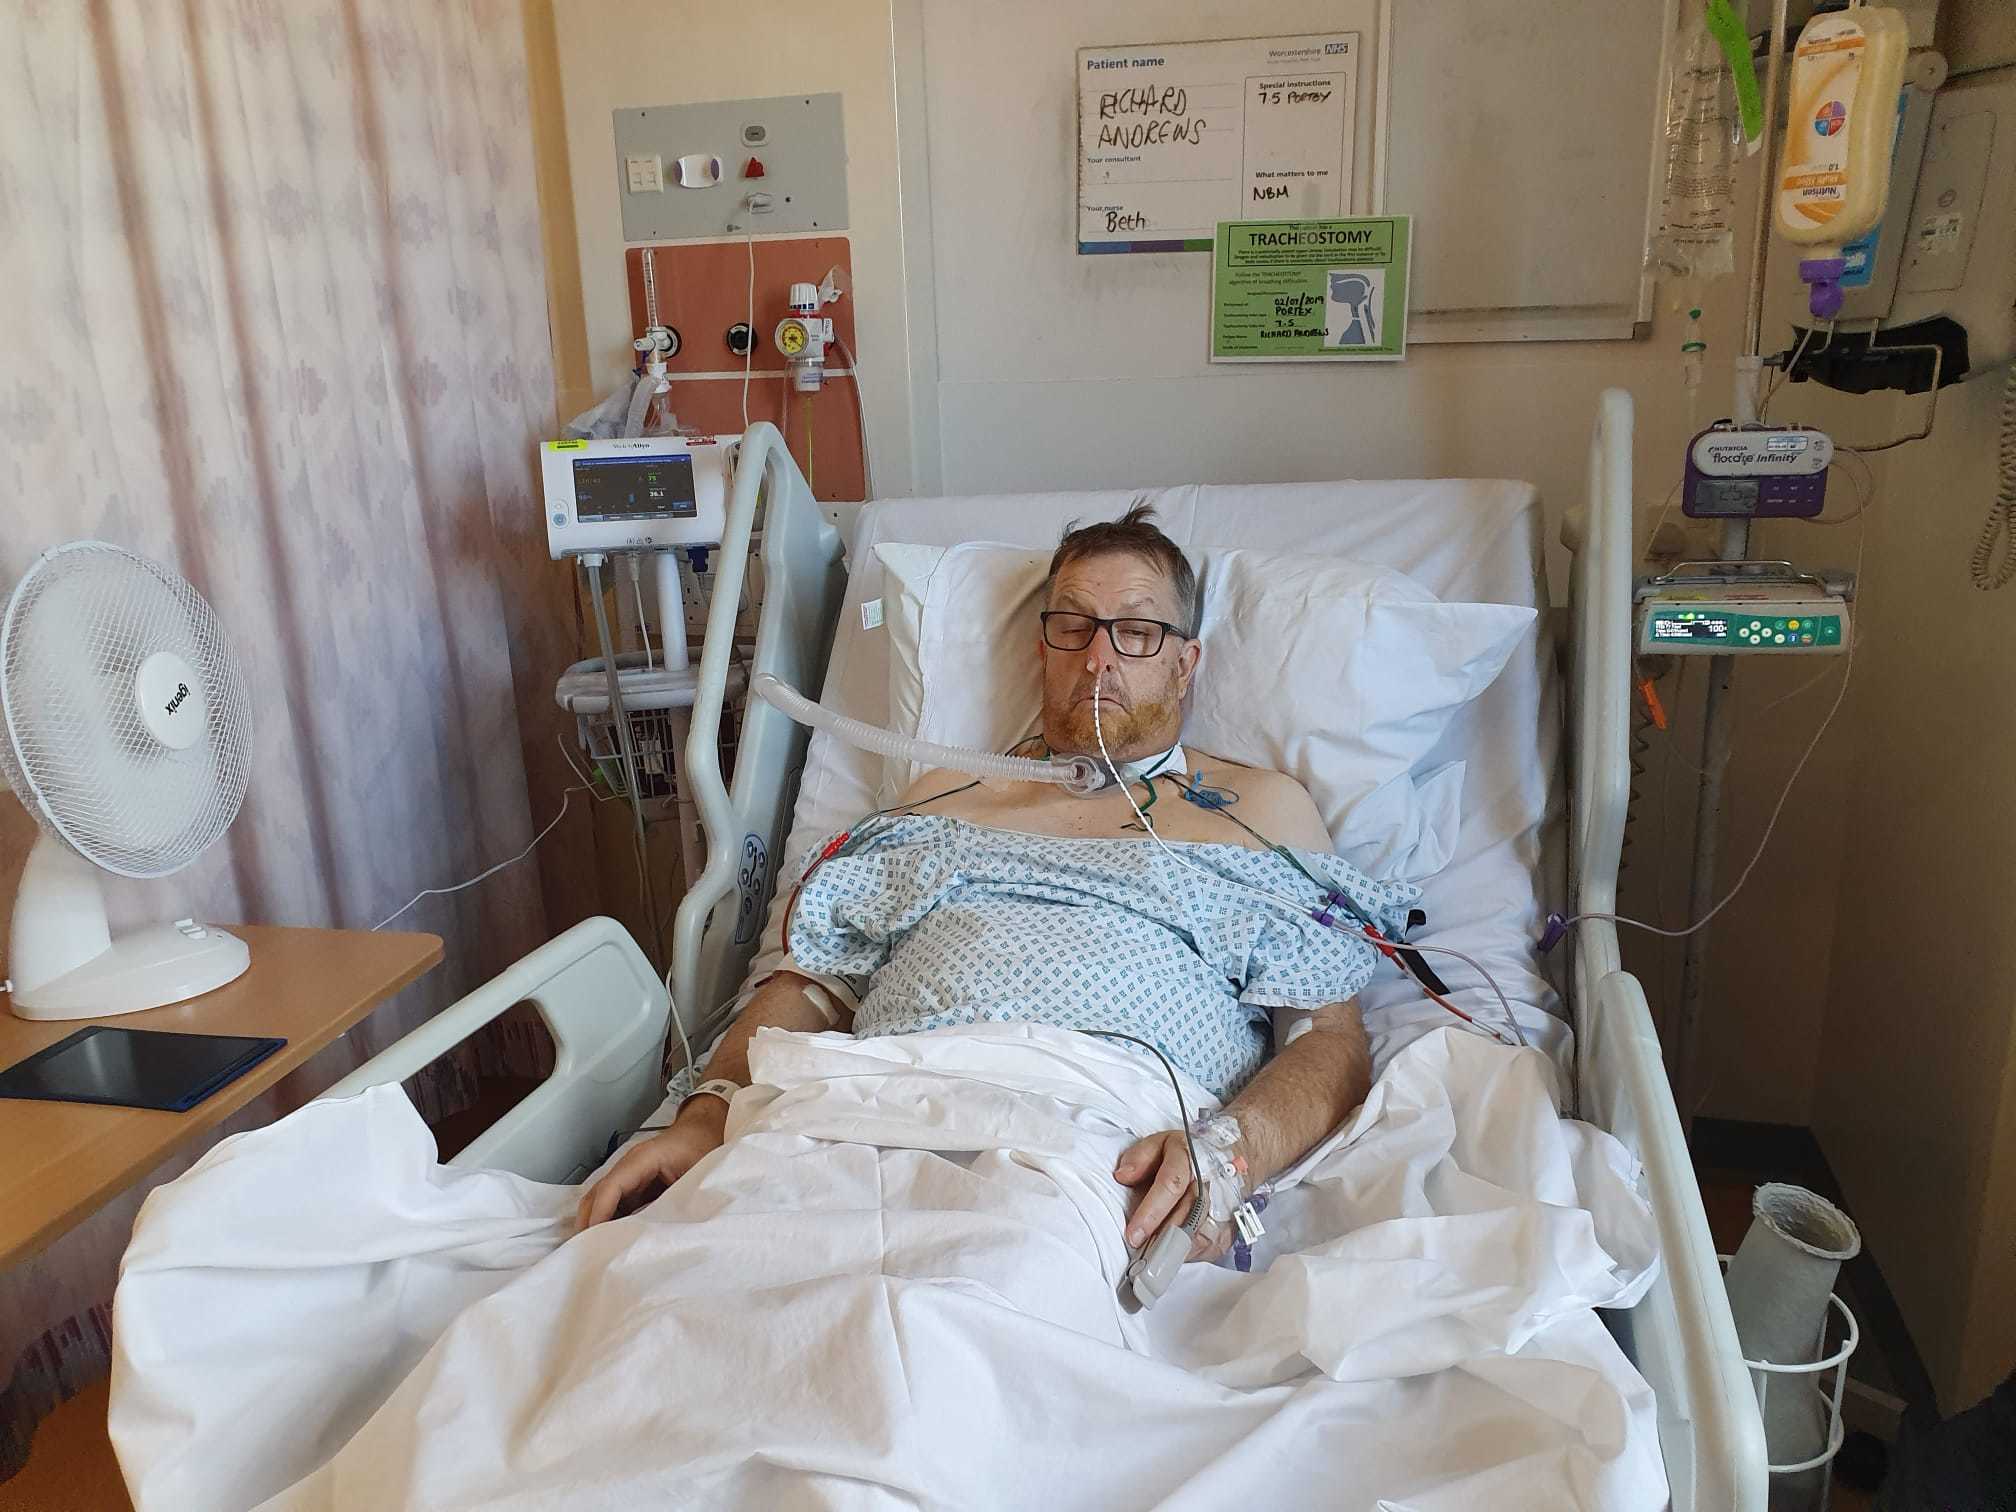 Richard Andrews in hospital during his treatment for throat cancer